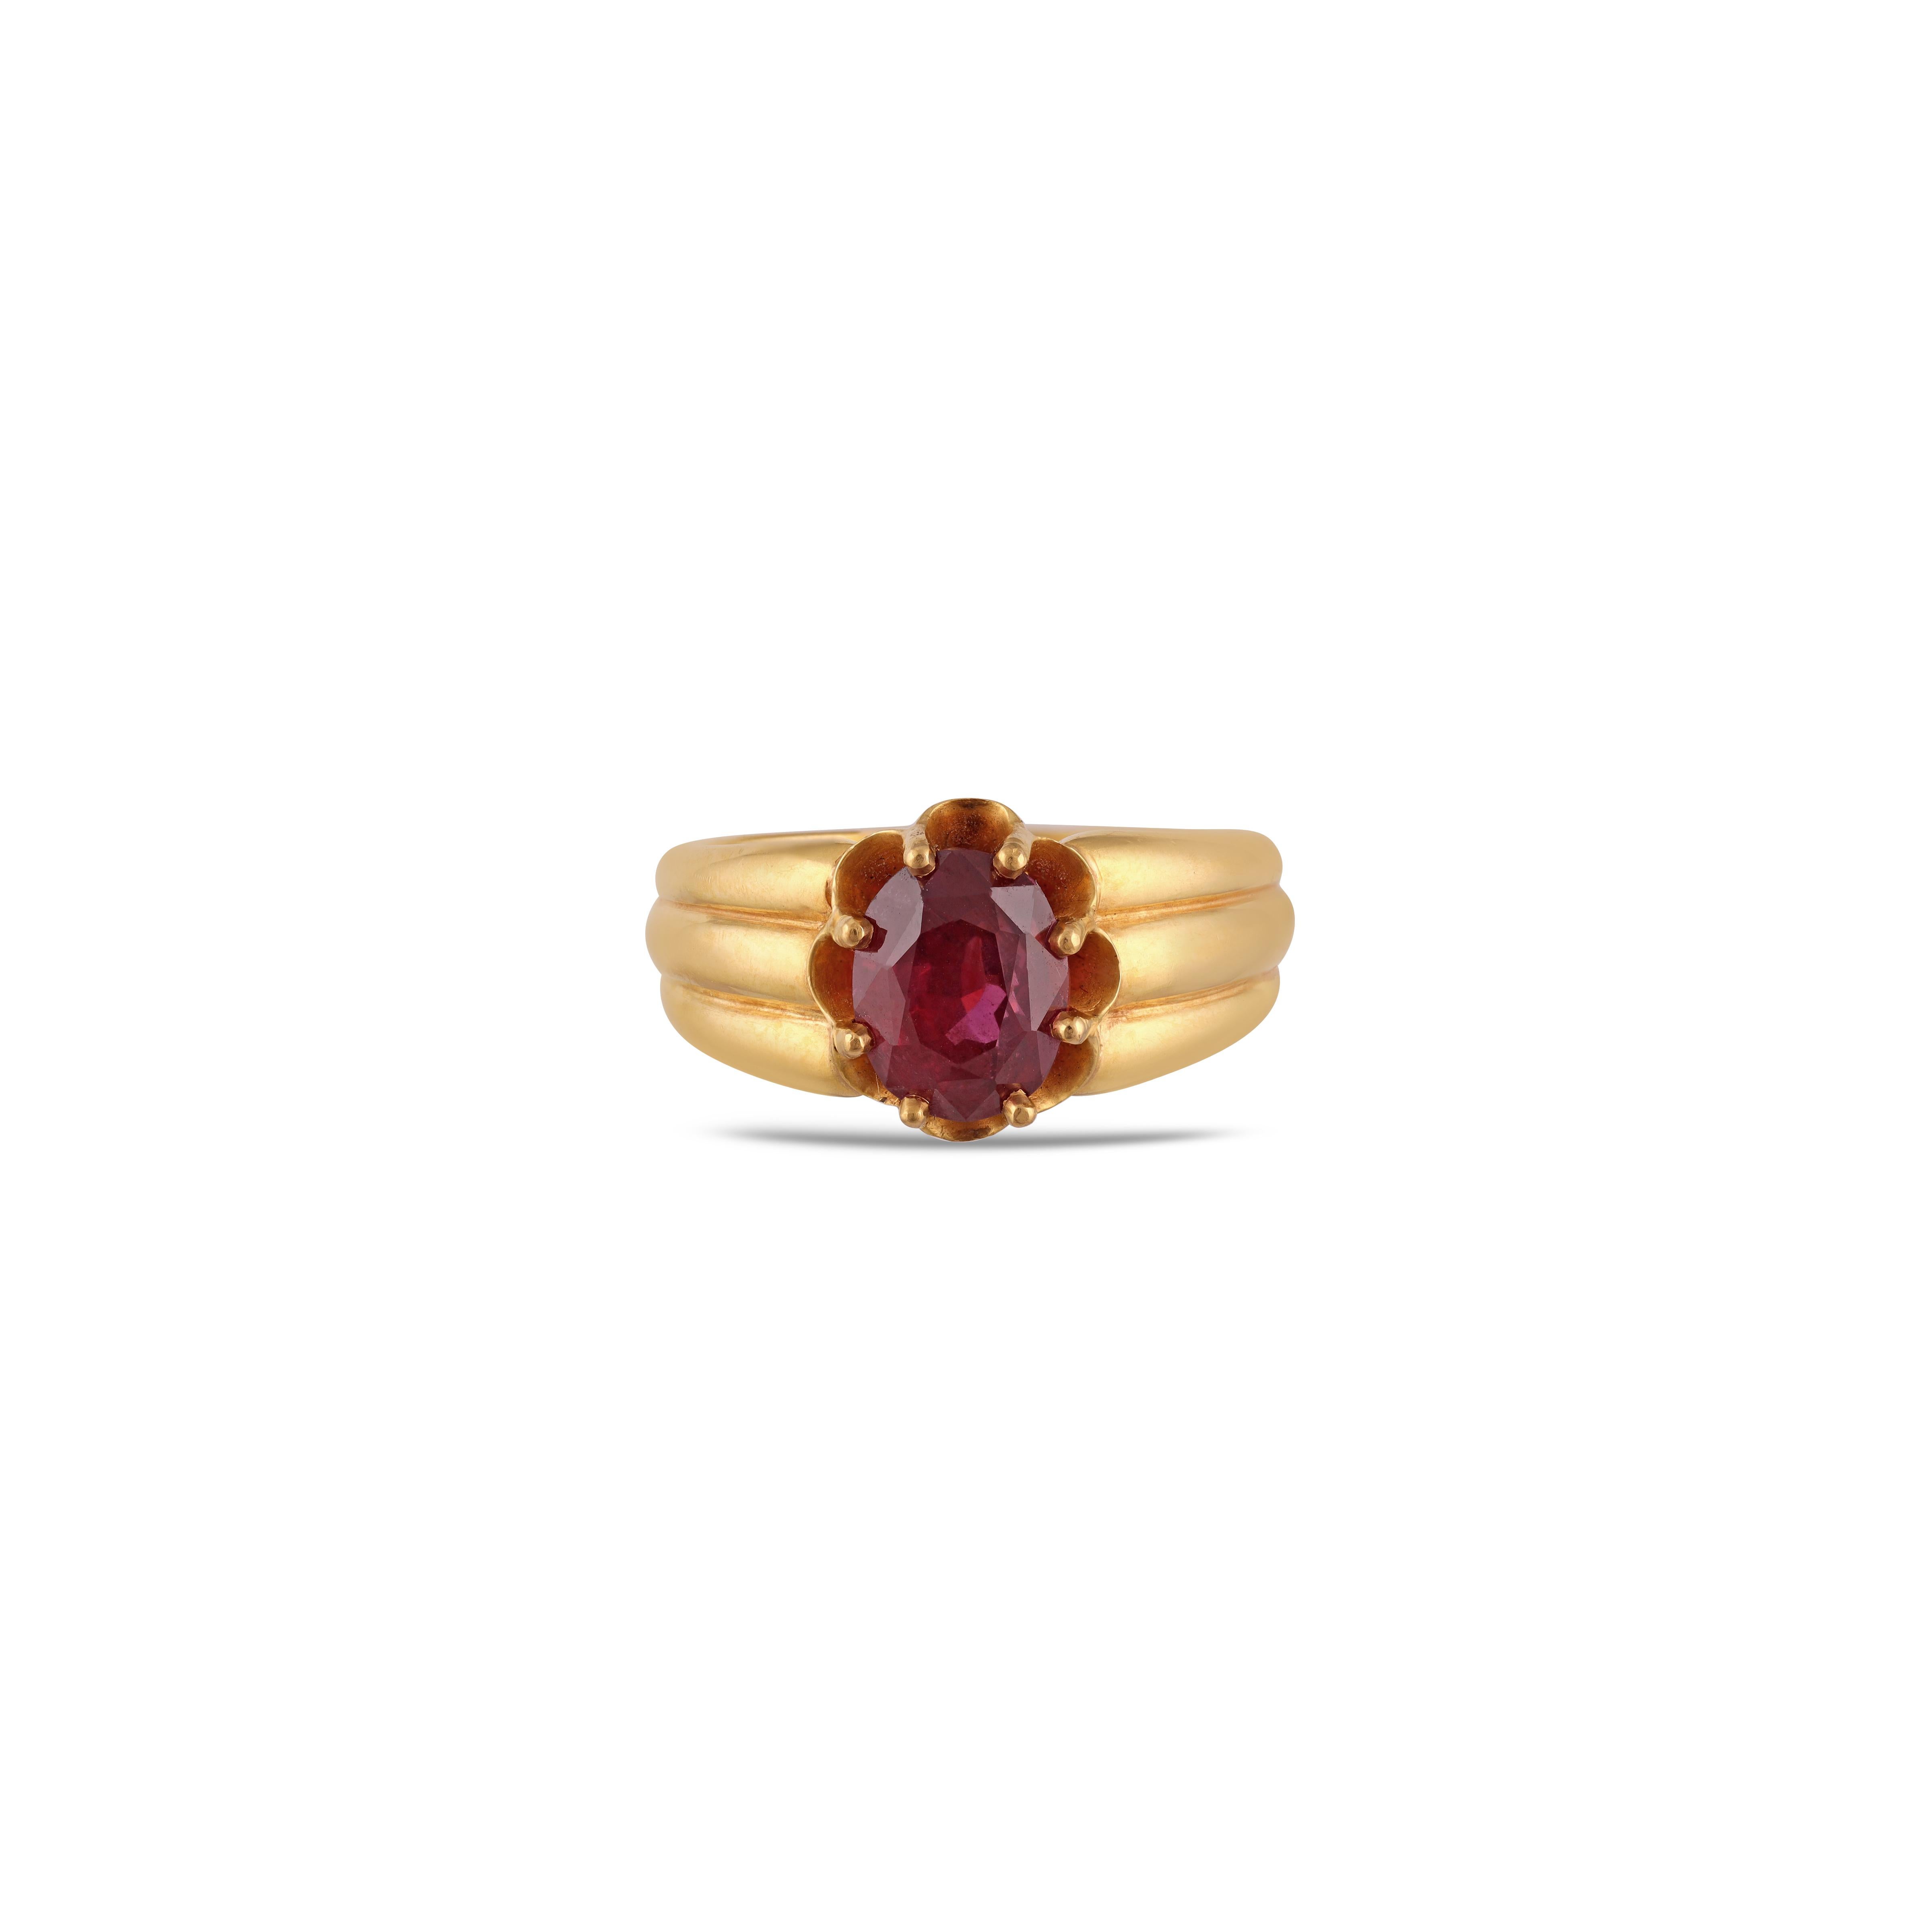 High Clear Natural Mozambique Ruby Ring in          
22k Gold.


Apart of our carefully curated collection & One of kind, this ring proudly displays a 3.27 carat high clear natural Mozambique ruby crowning a 22k  Gold. The ruby's prongs hold the